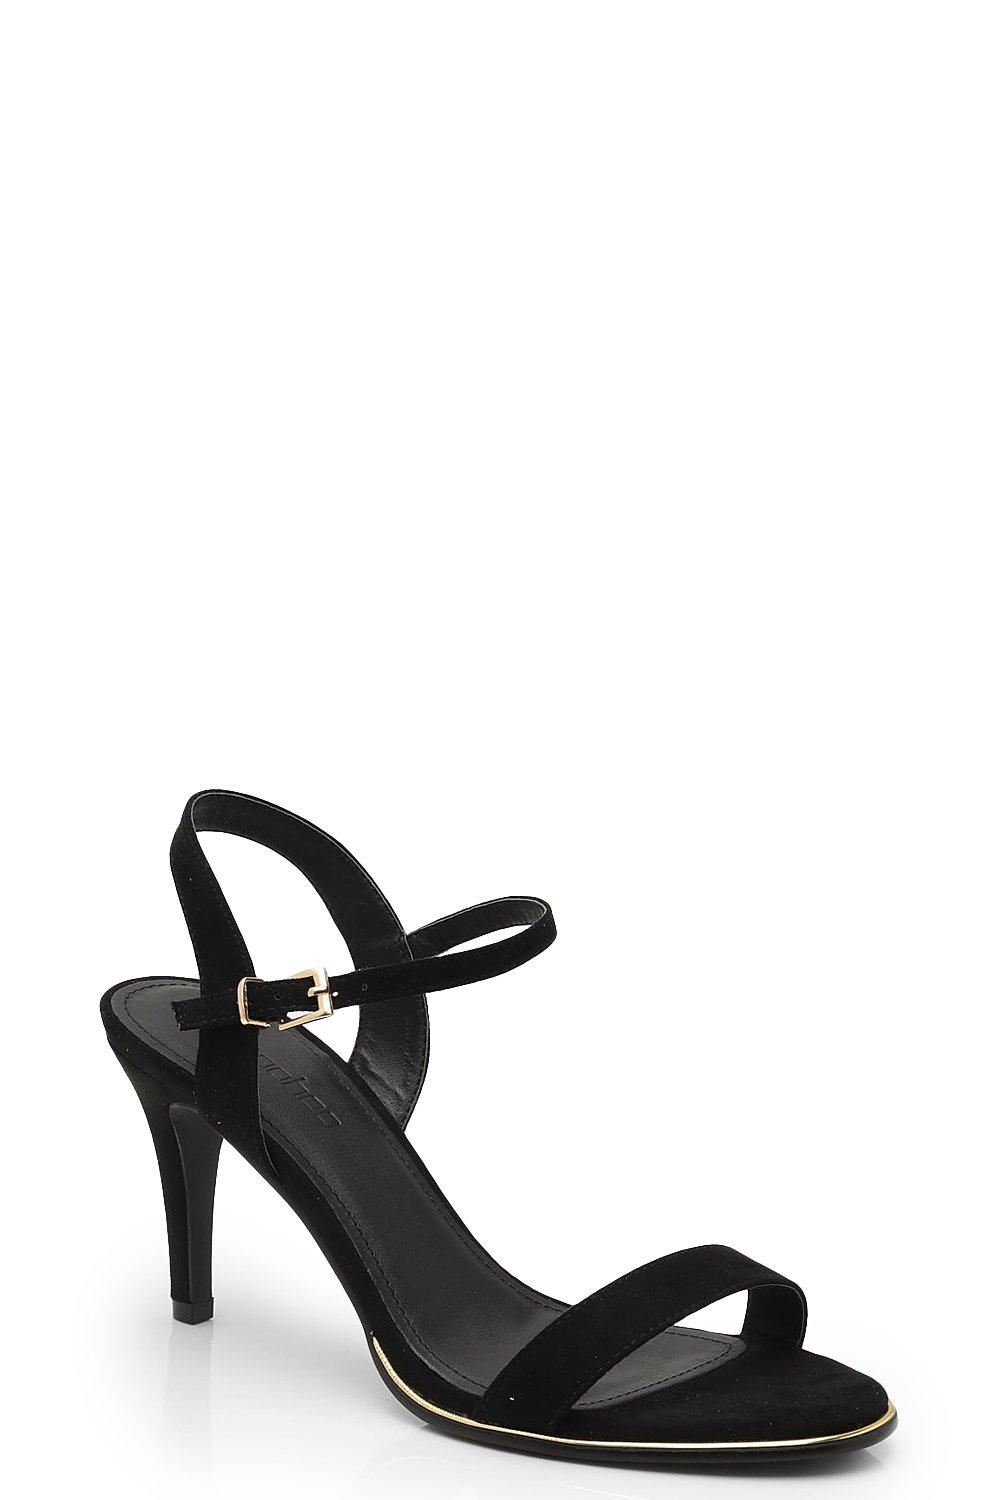 black shoes with gold trim